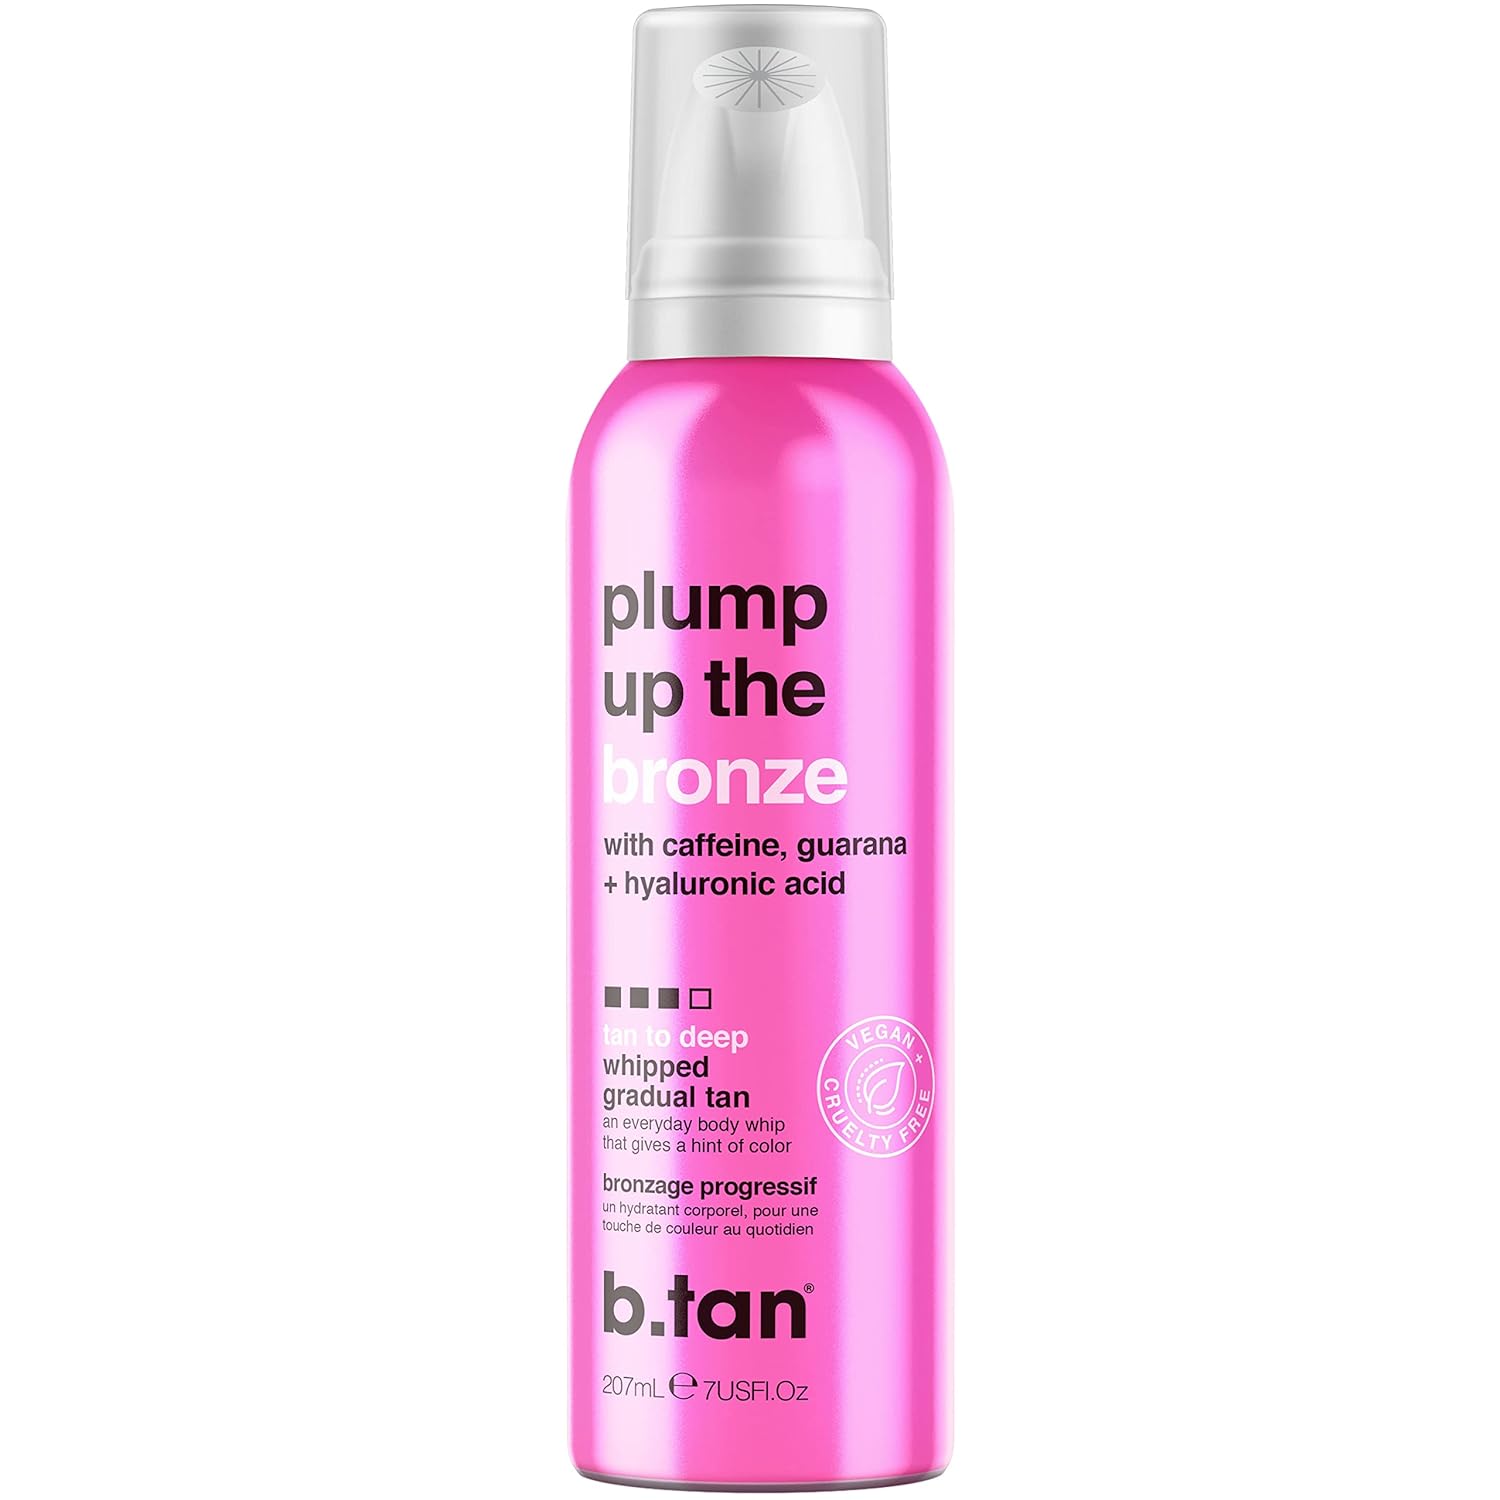 b.tan Dark Gradual Self Tanner Whip | Plump Up the Bronze - Daily Aerosol Foam to Build a Deep, Bronzed Everyday Glow, Enriched With Hyaluronic Acid + Guarana For Plump, Juicy Skin, 207ml